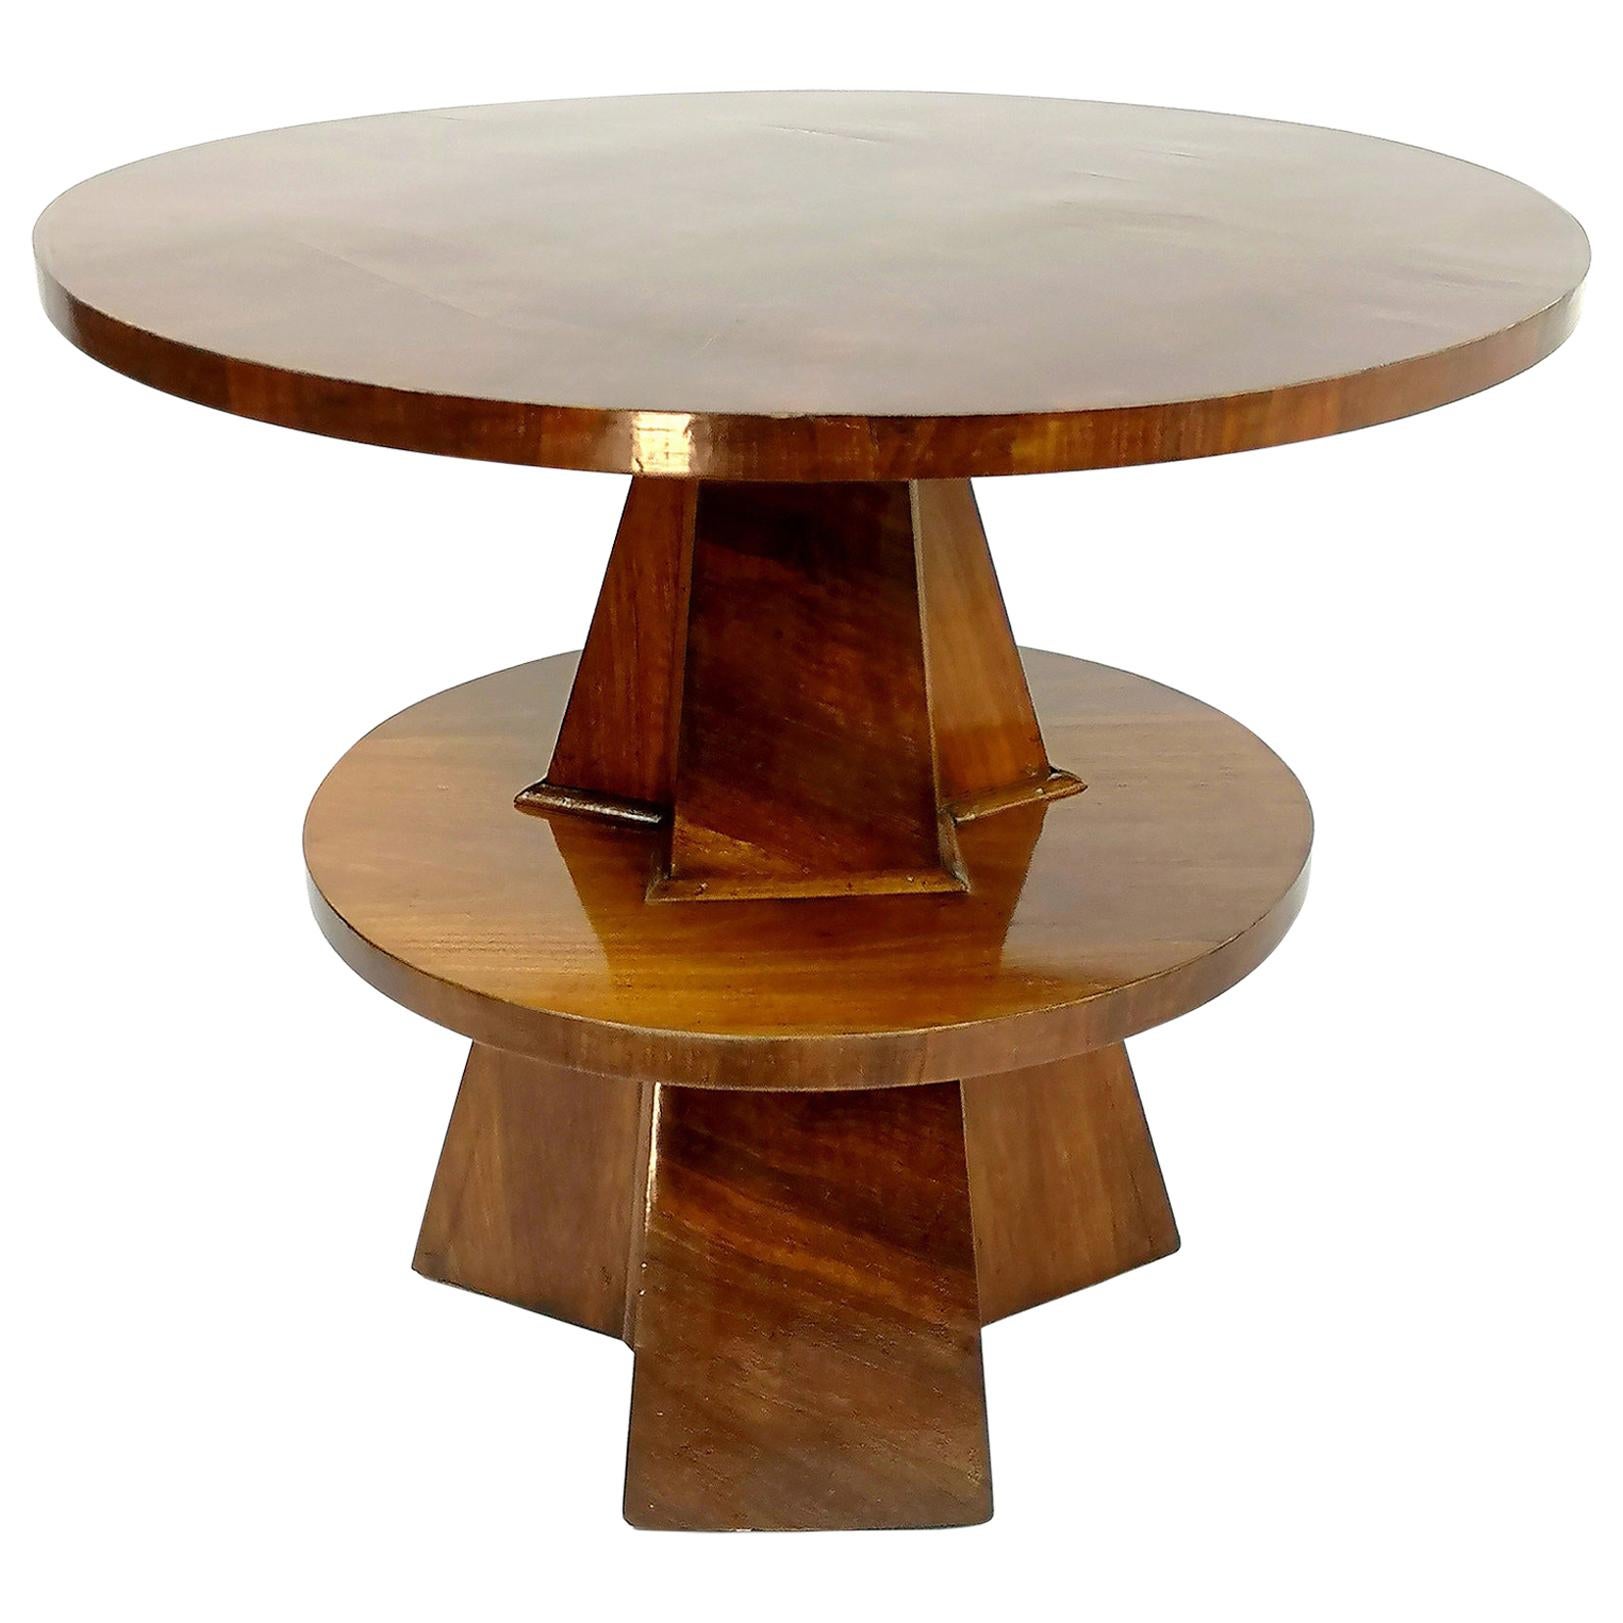 Art Deco Saloon Table with Walnut Veneer and French Lacquer Polish, 1930's